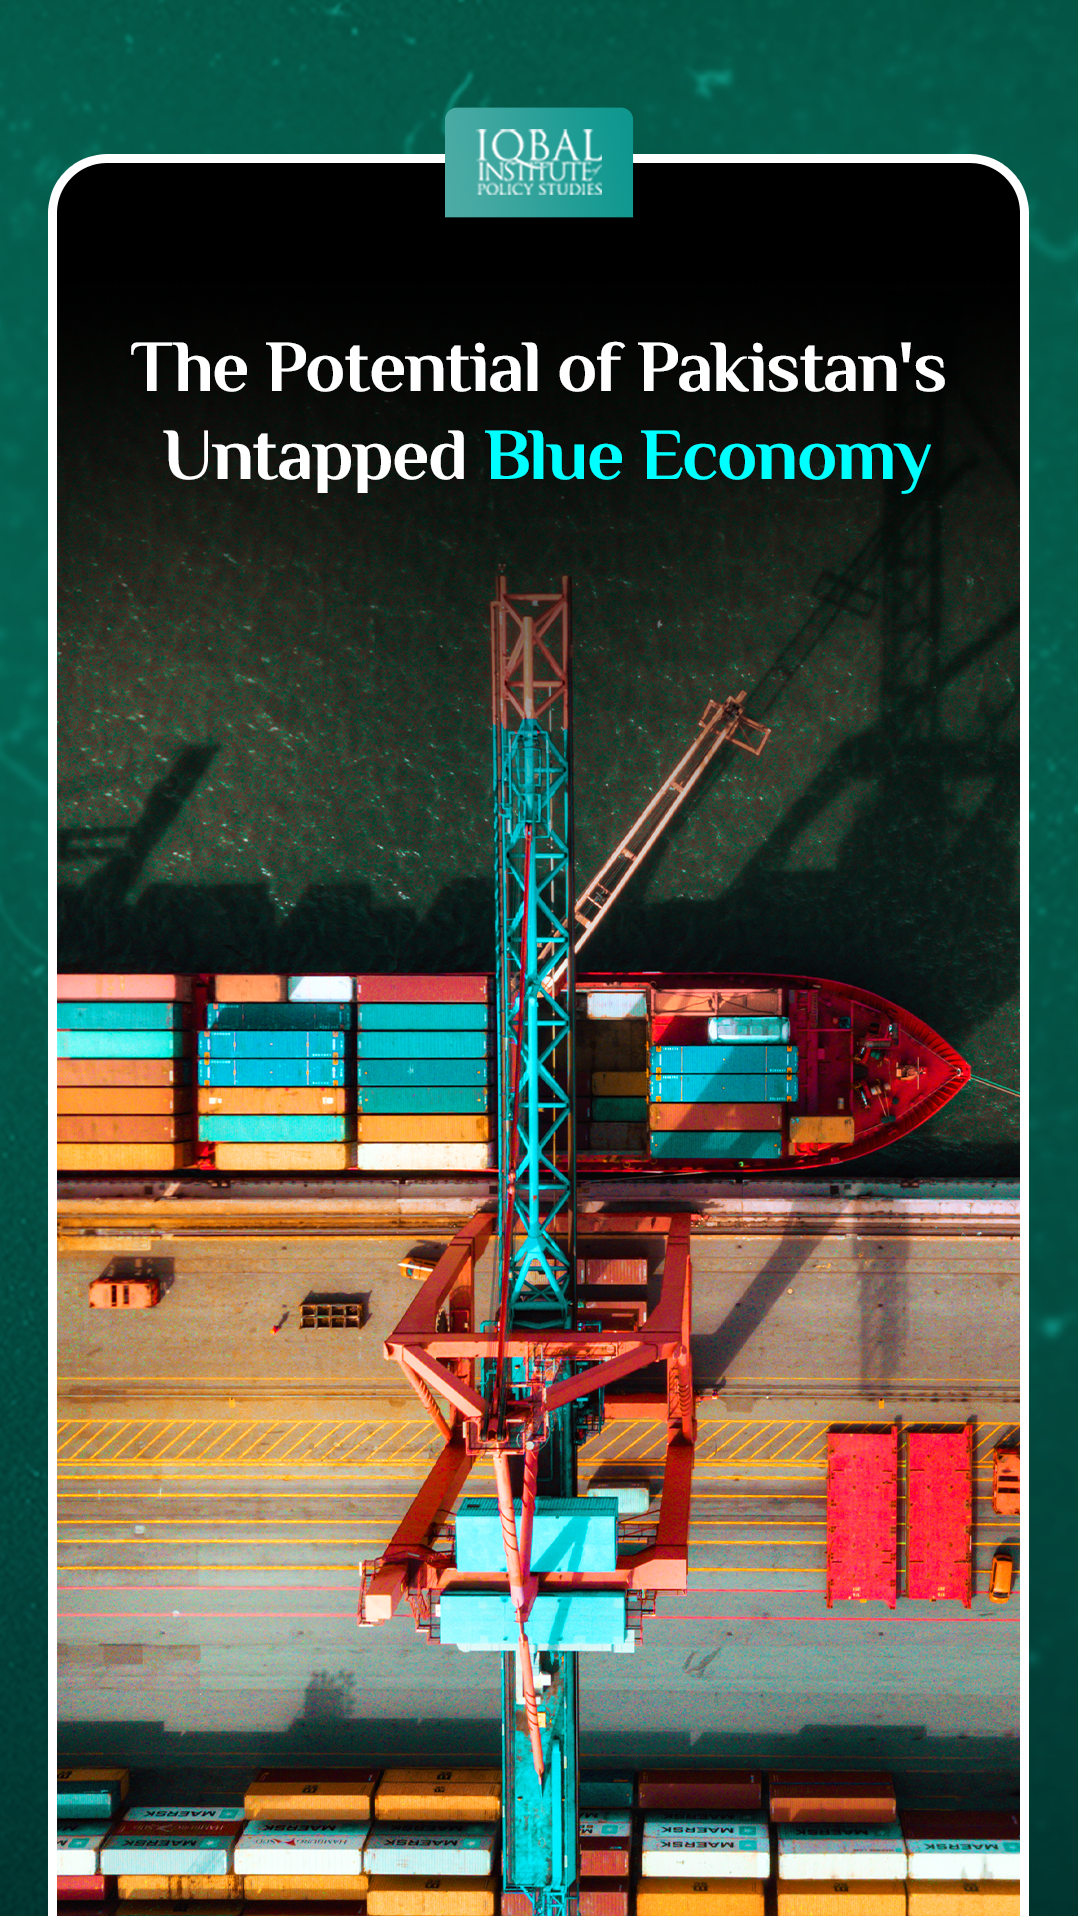 The potential of Pakistan's untapped Blue Economy